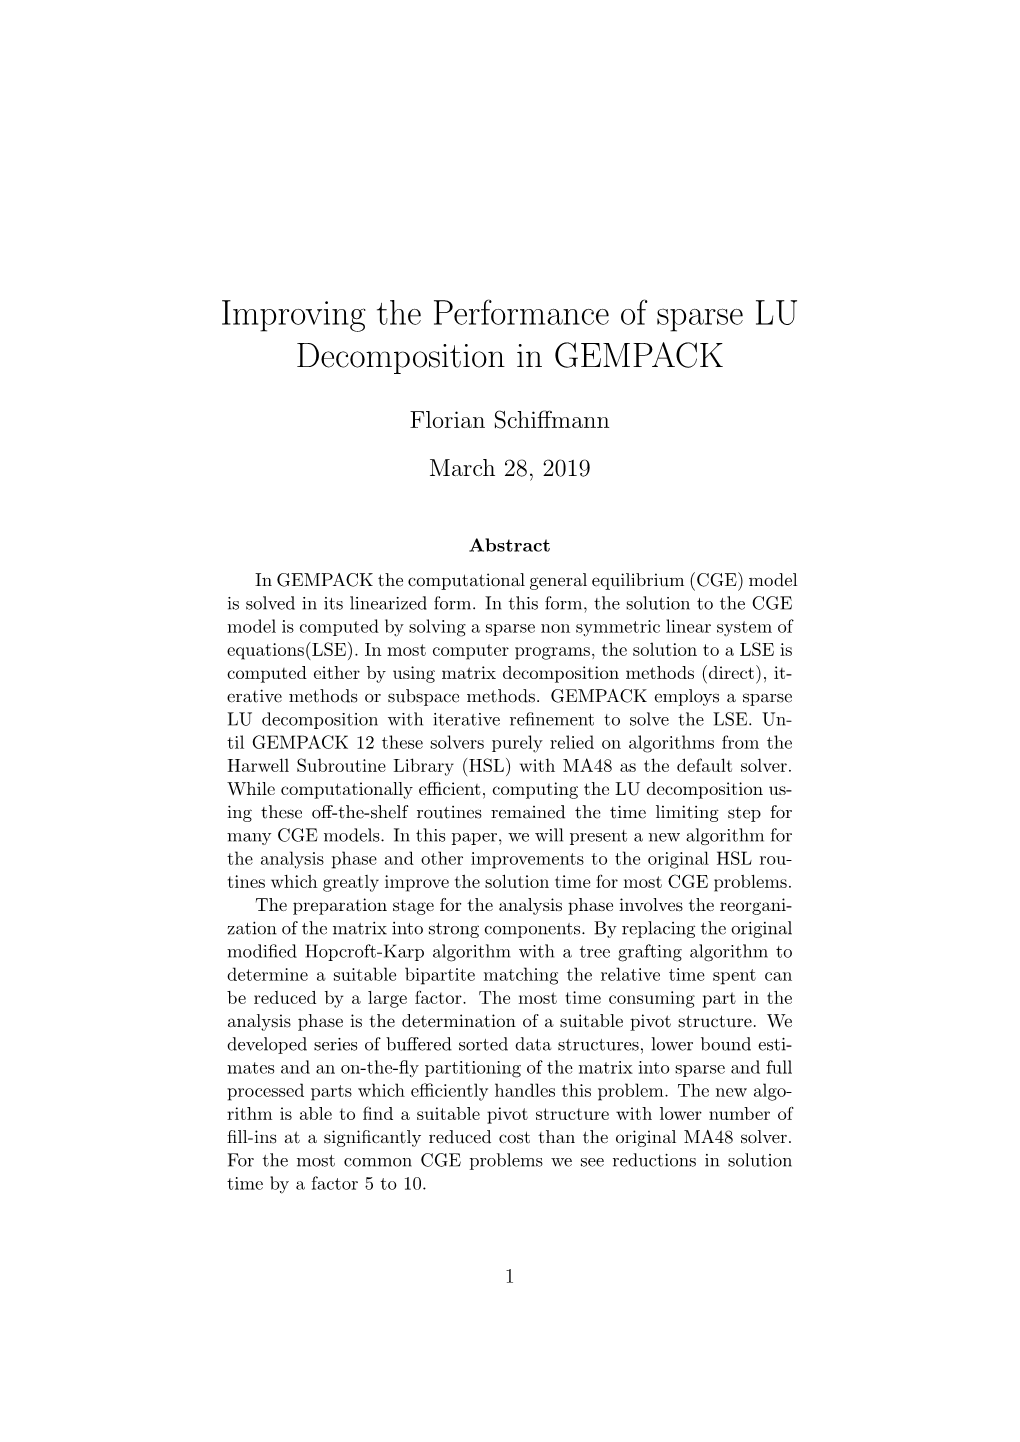 Improving the Performance of Sparse LU Decomposition in GEMPACK